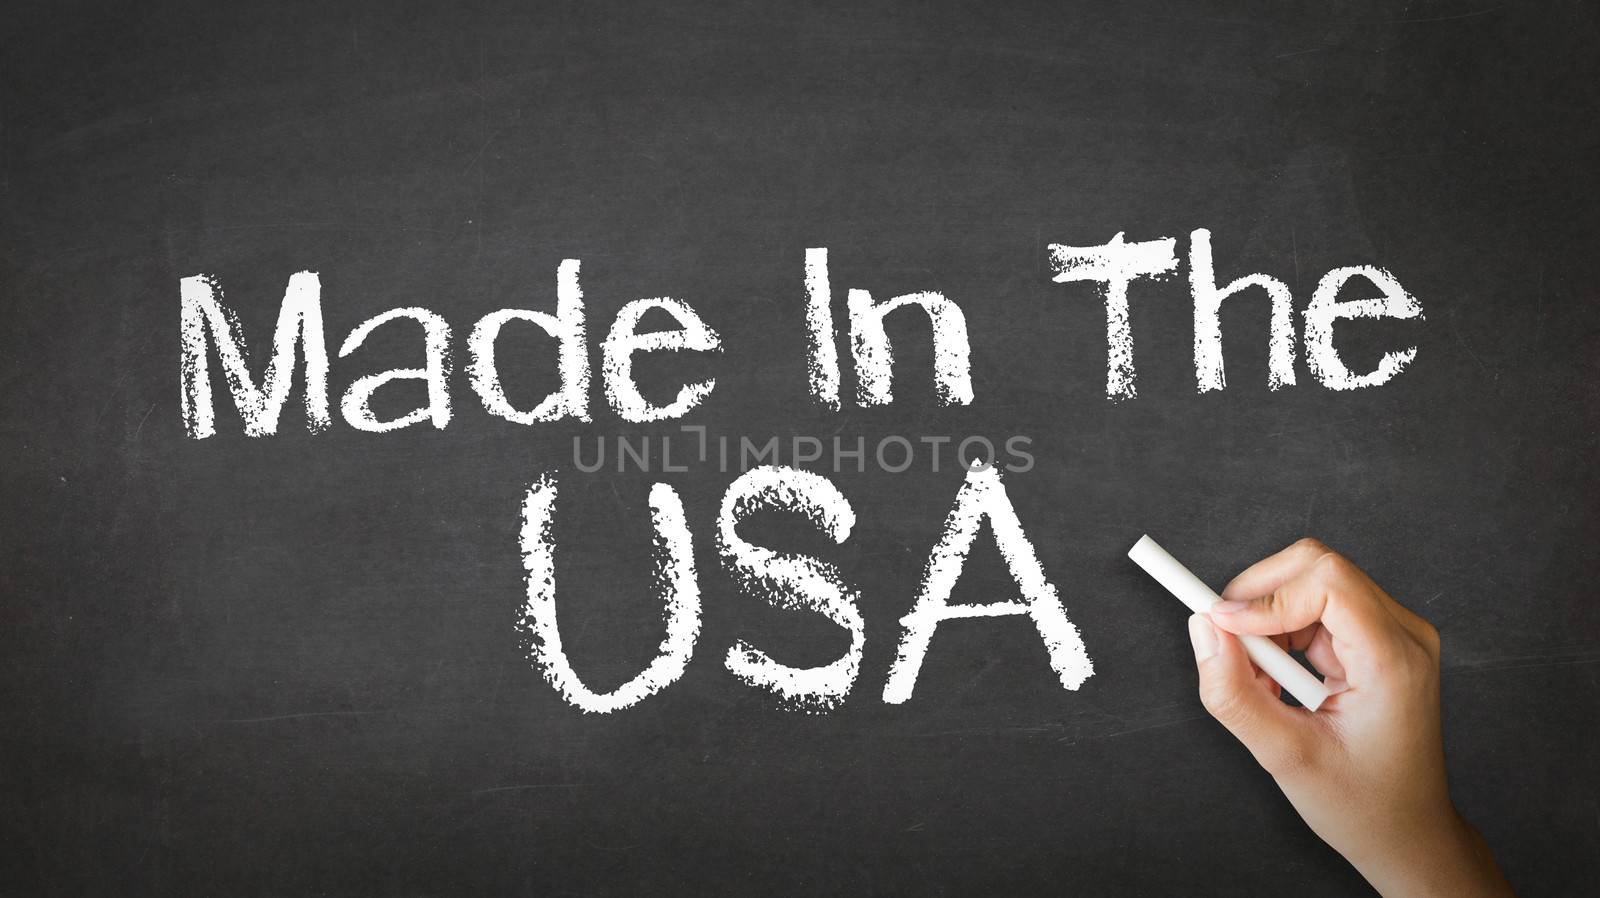 A person drawing and pointing at a Made in USA Chalk Illustration